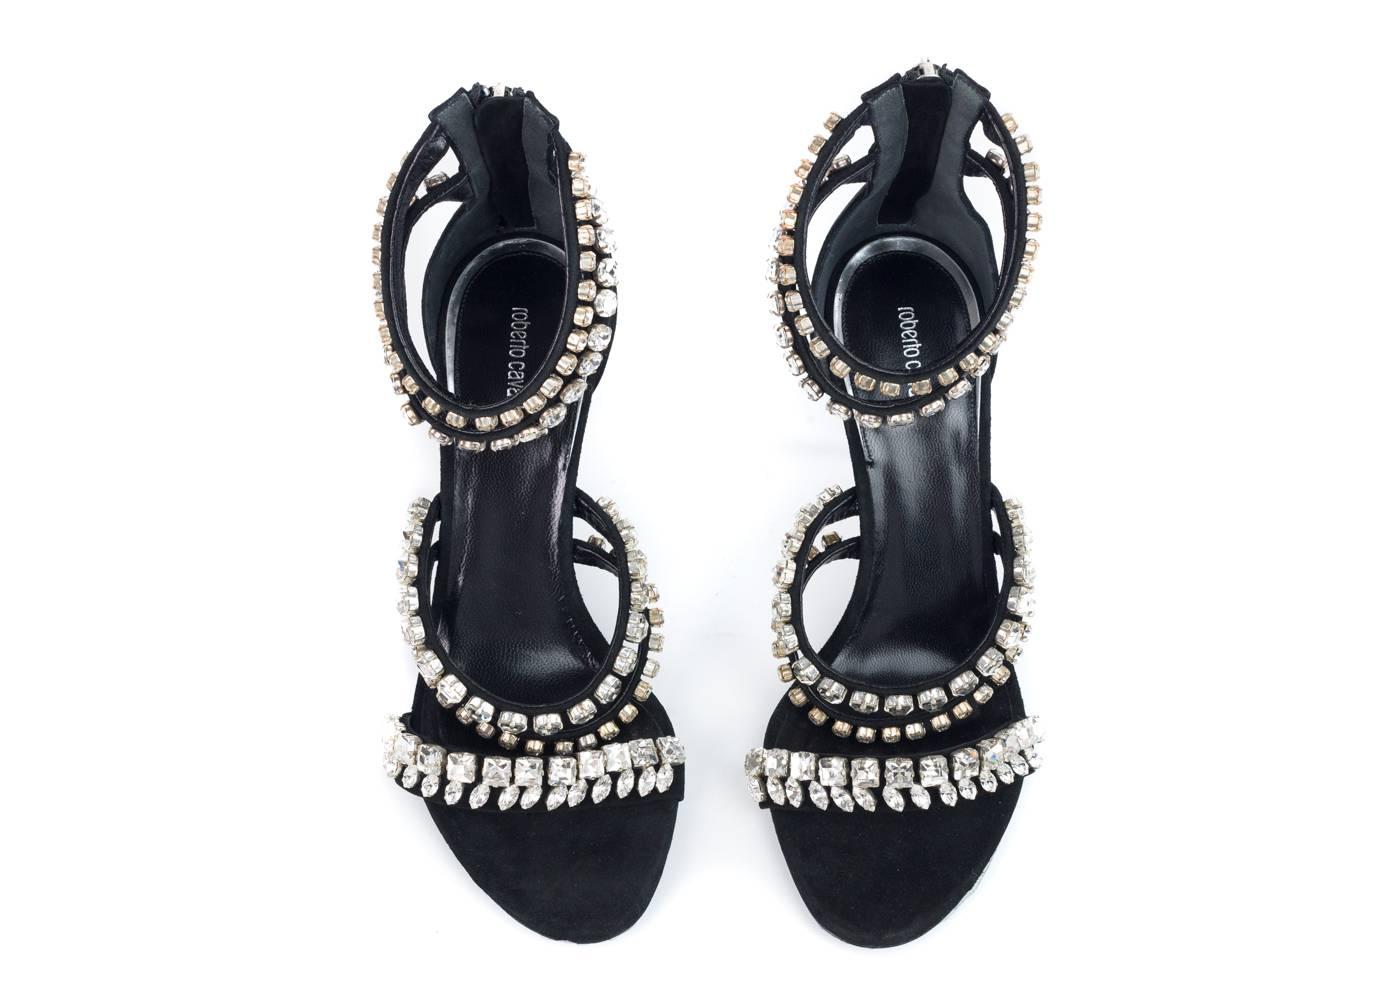 
Brand New Roberto Cavalli Heels
 Original Box & Dust bag Included
Retails in Stores and Online for $985
Size IT36 / US6 Fits True to Size

Roberto Cavalli black suede sandals are embellished with beautiful crystals. Sassy and unique, these